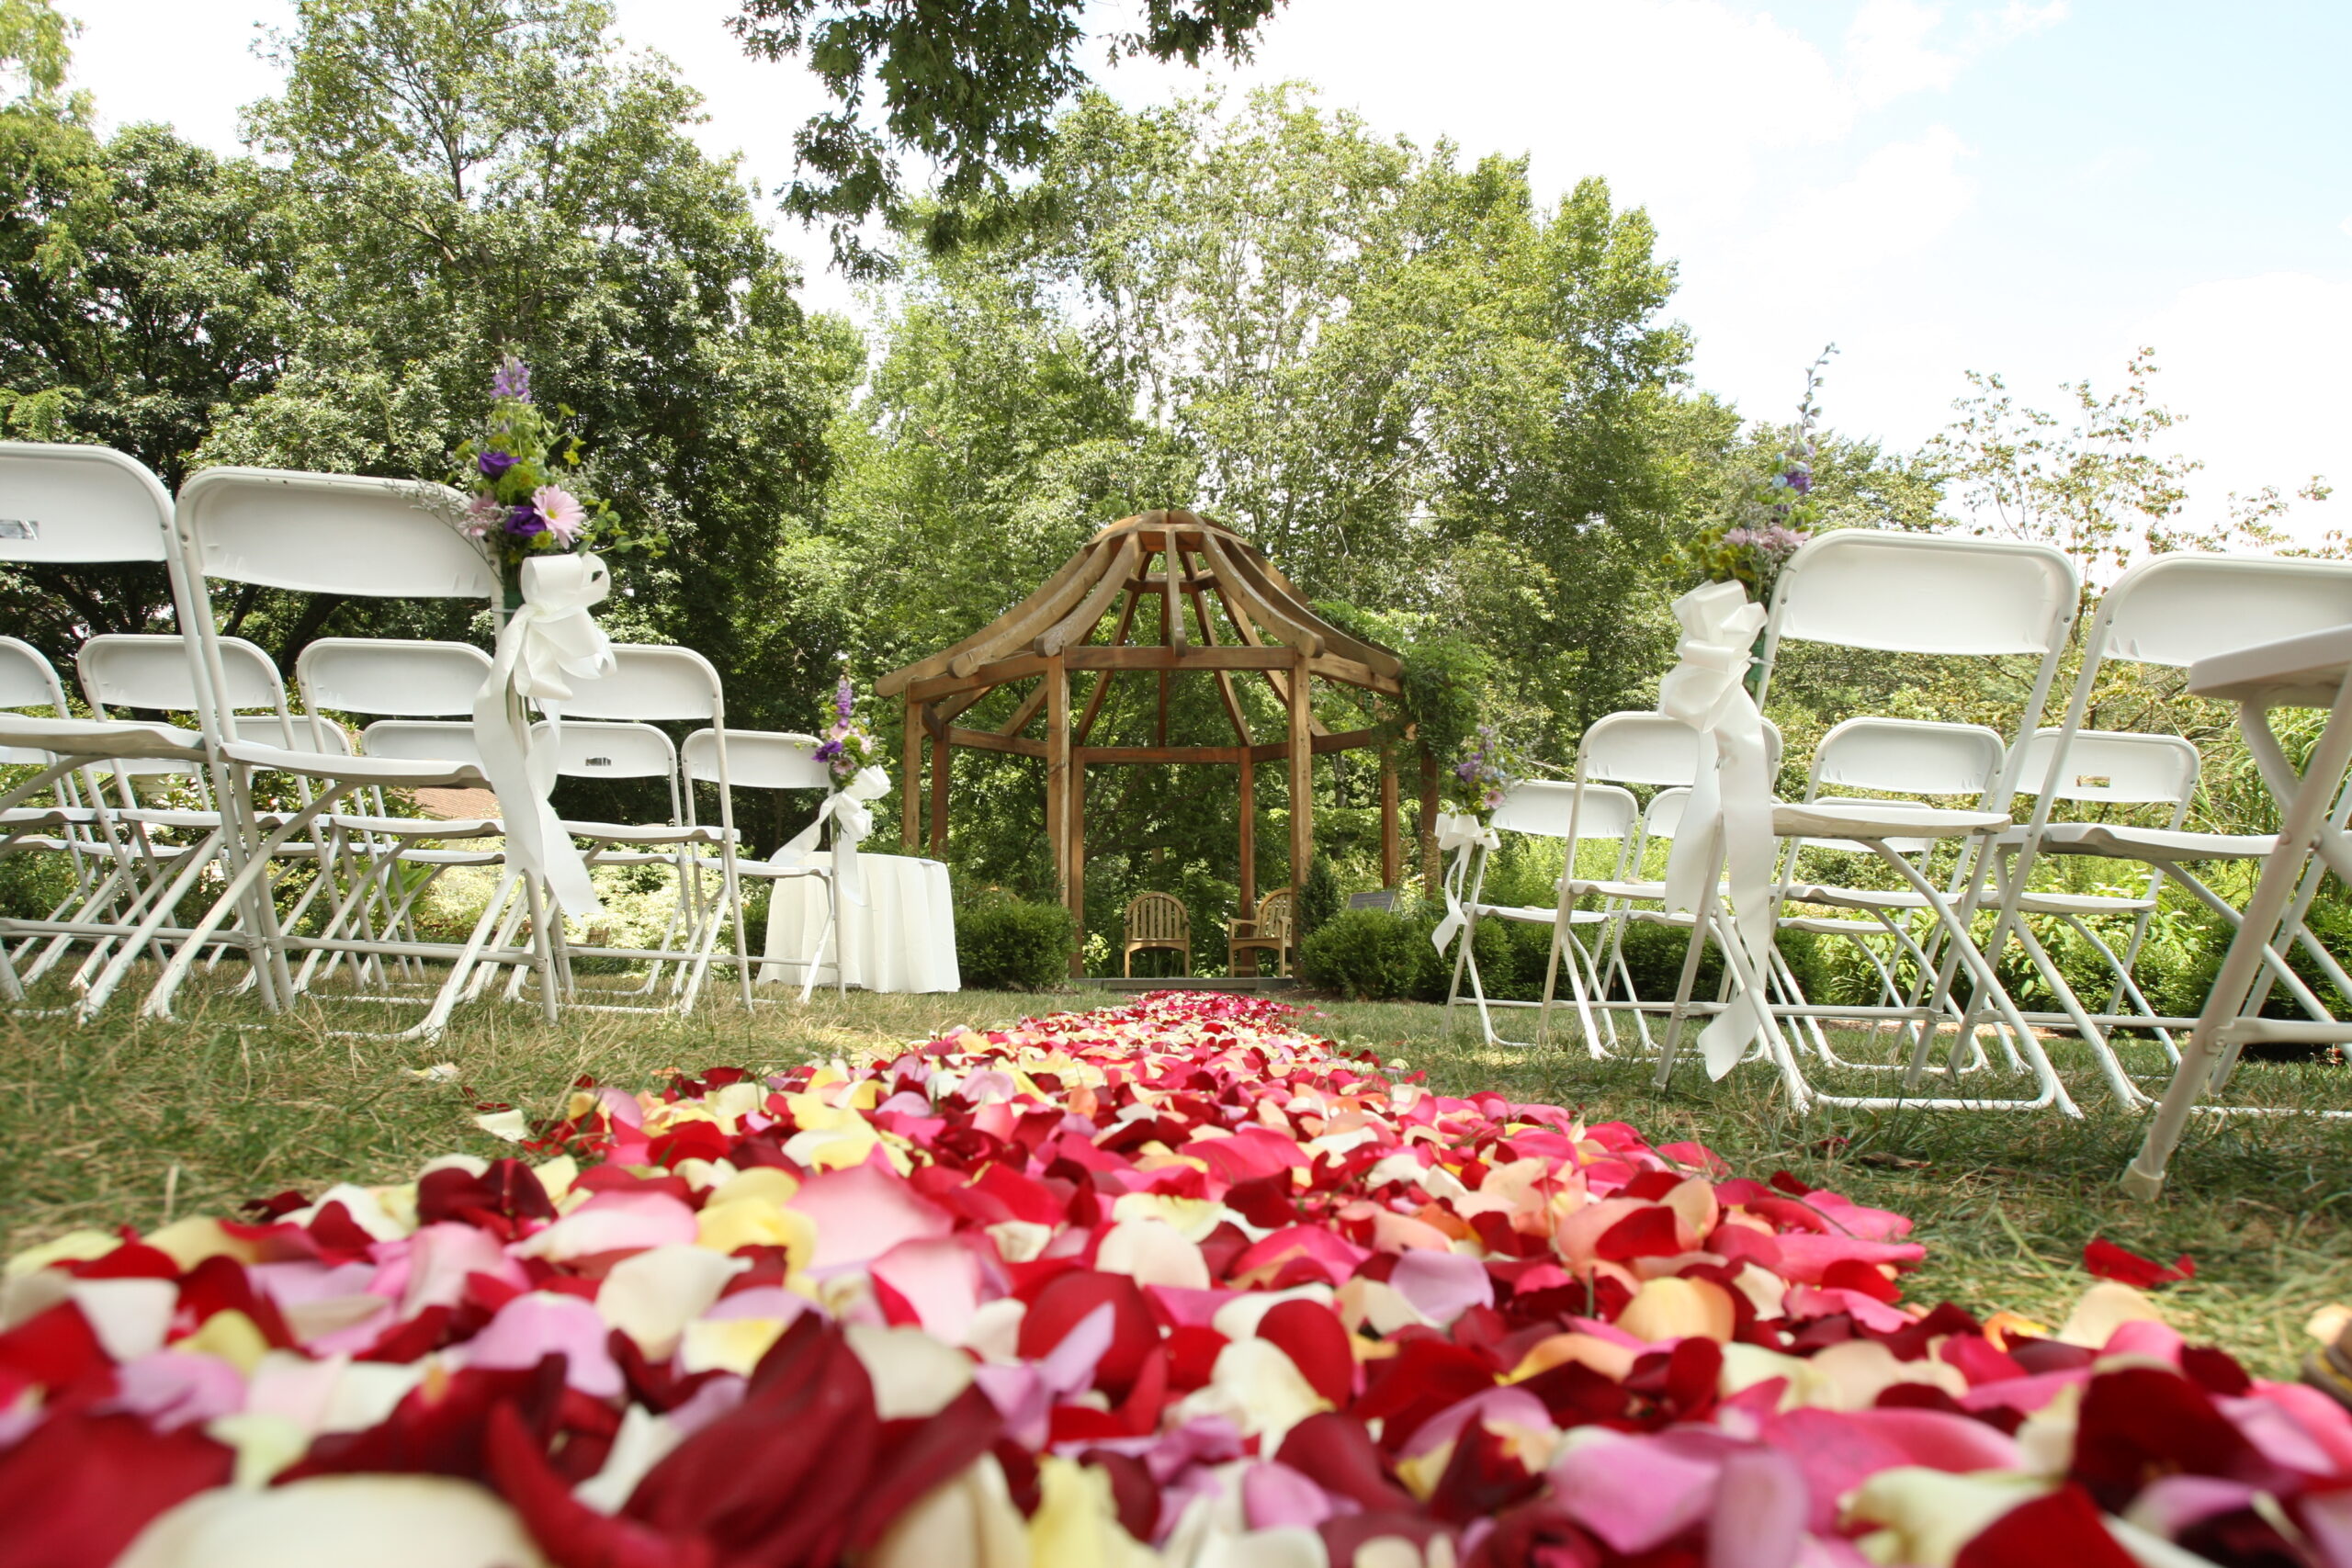 Consider Rutgers Gardens for your next event such as weddings and parties.